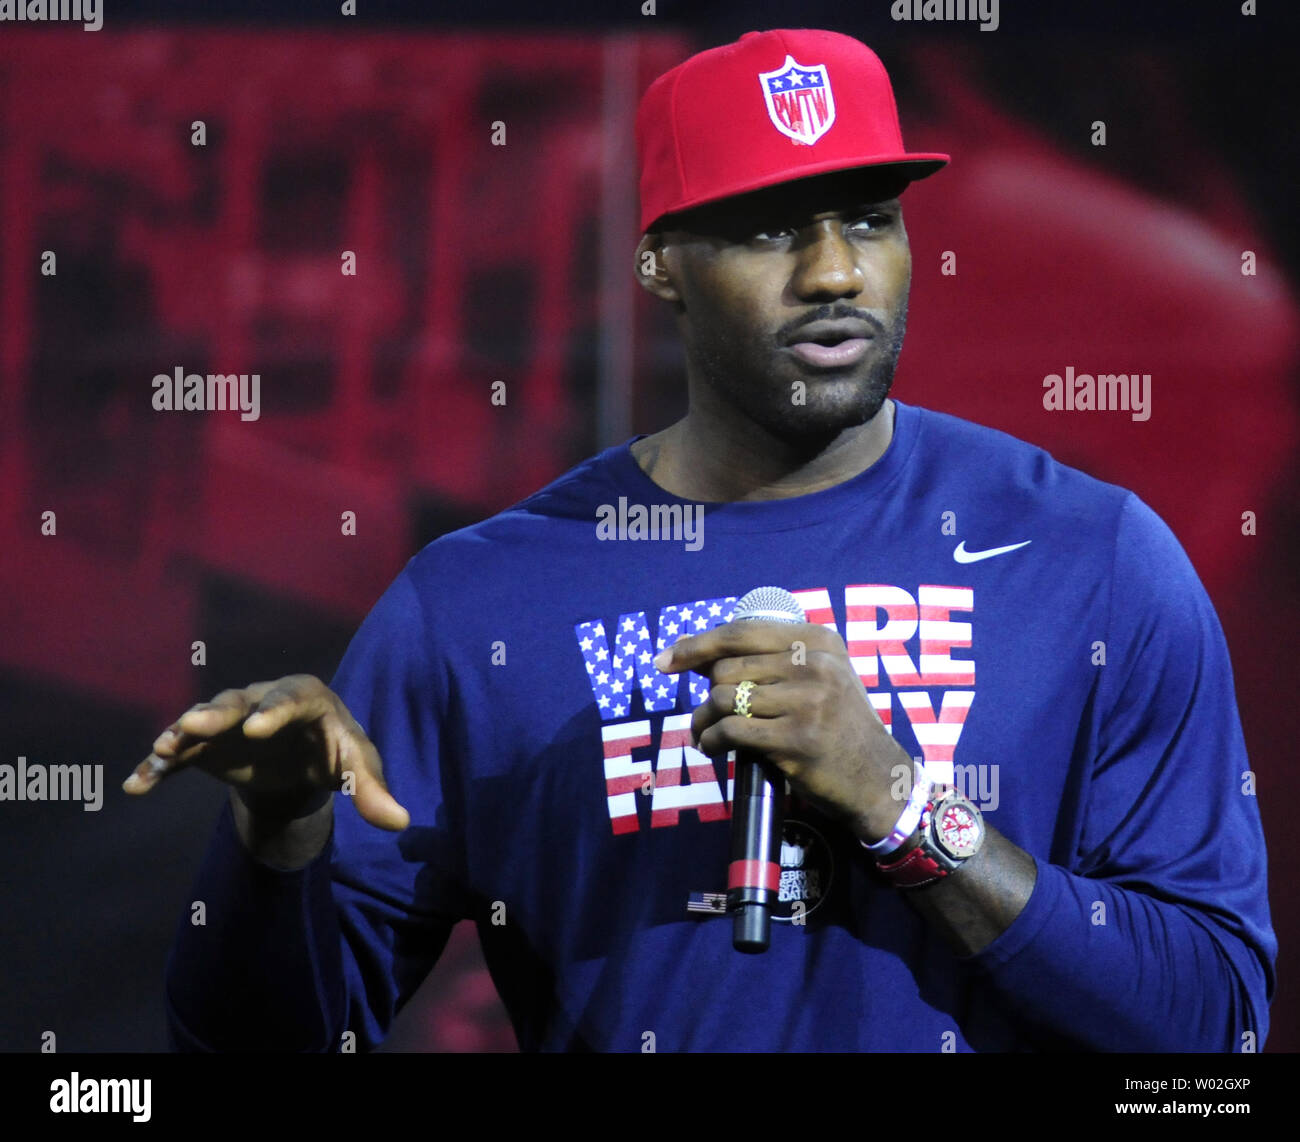 LeBron James addresses the crowd of young people and the families  before introducing First Lady Michelle Obama at a special event promoting her "Reach Higher" program  along with the LeBron James Family Foundnation at the James A. Rhodes Arena, at the University of Akron in Akron, Ohio.  Photo by Archie Carpenter/UPI Stock Photo